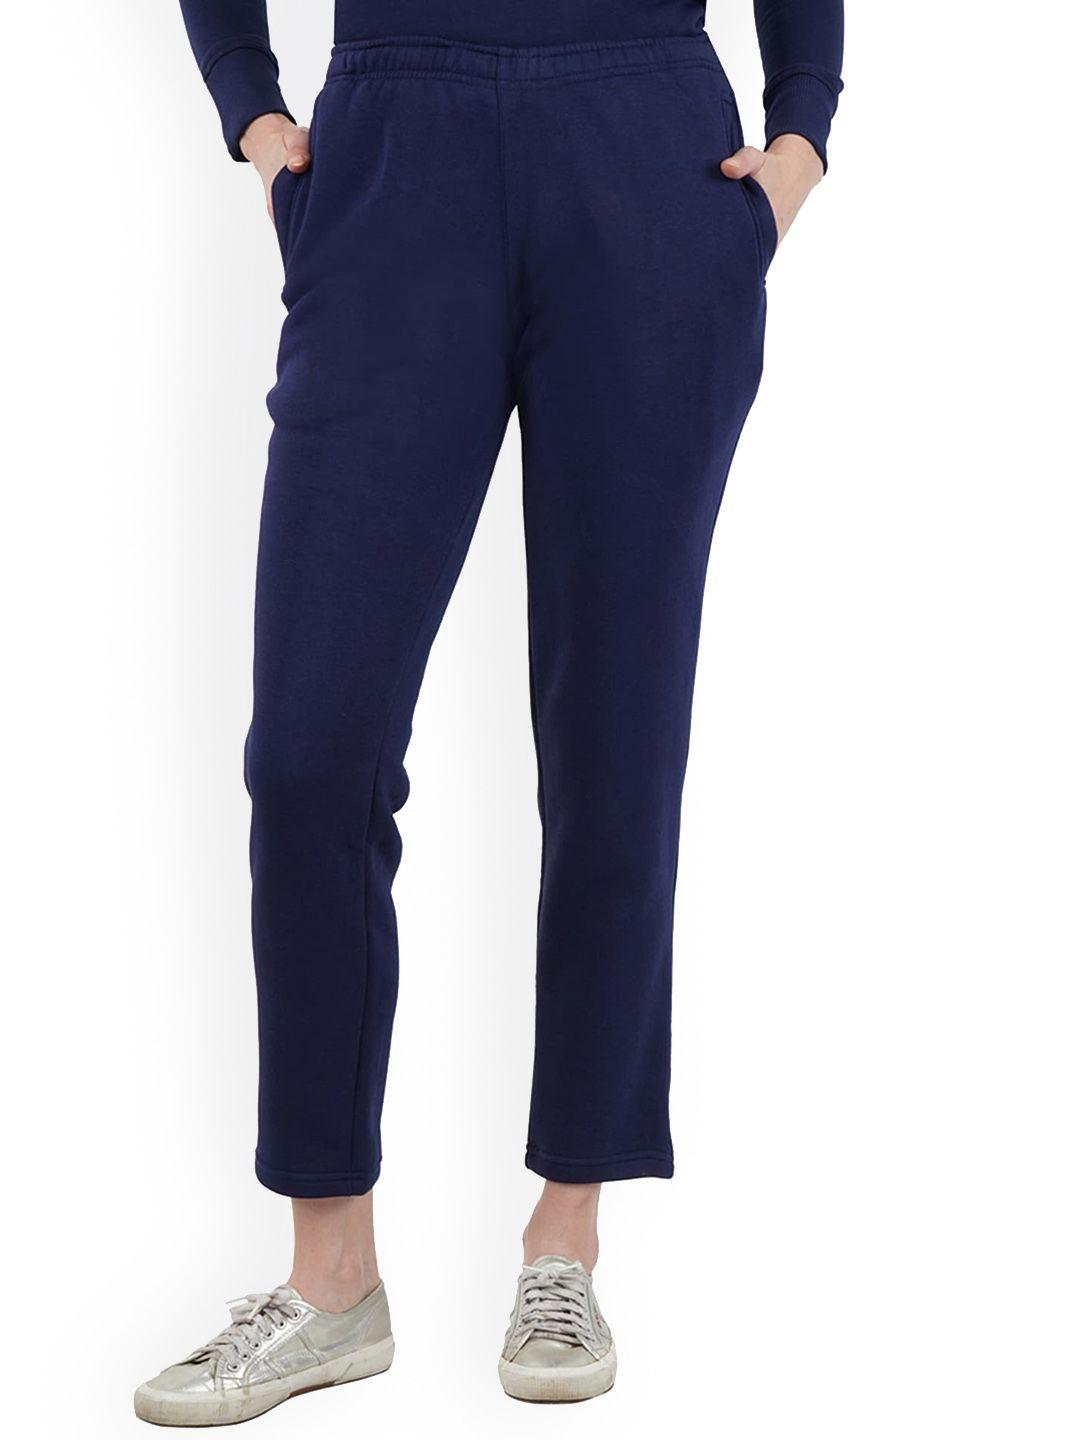 dyca women navy blue solid regular fit cotton track pant